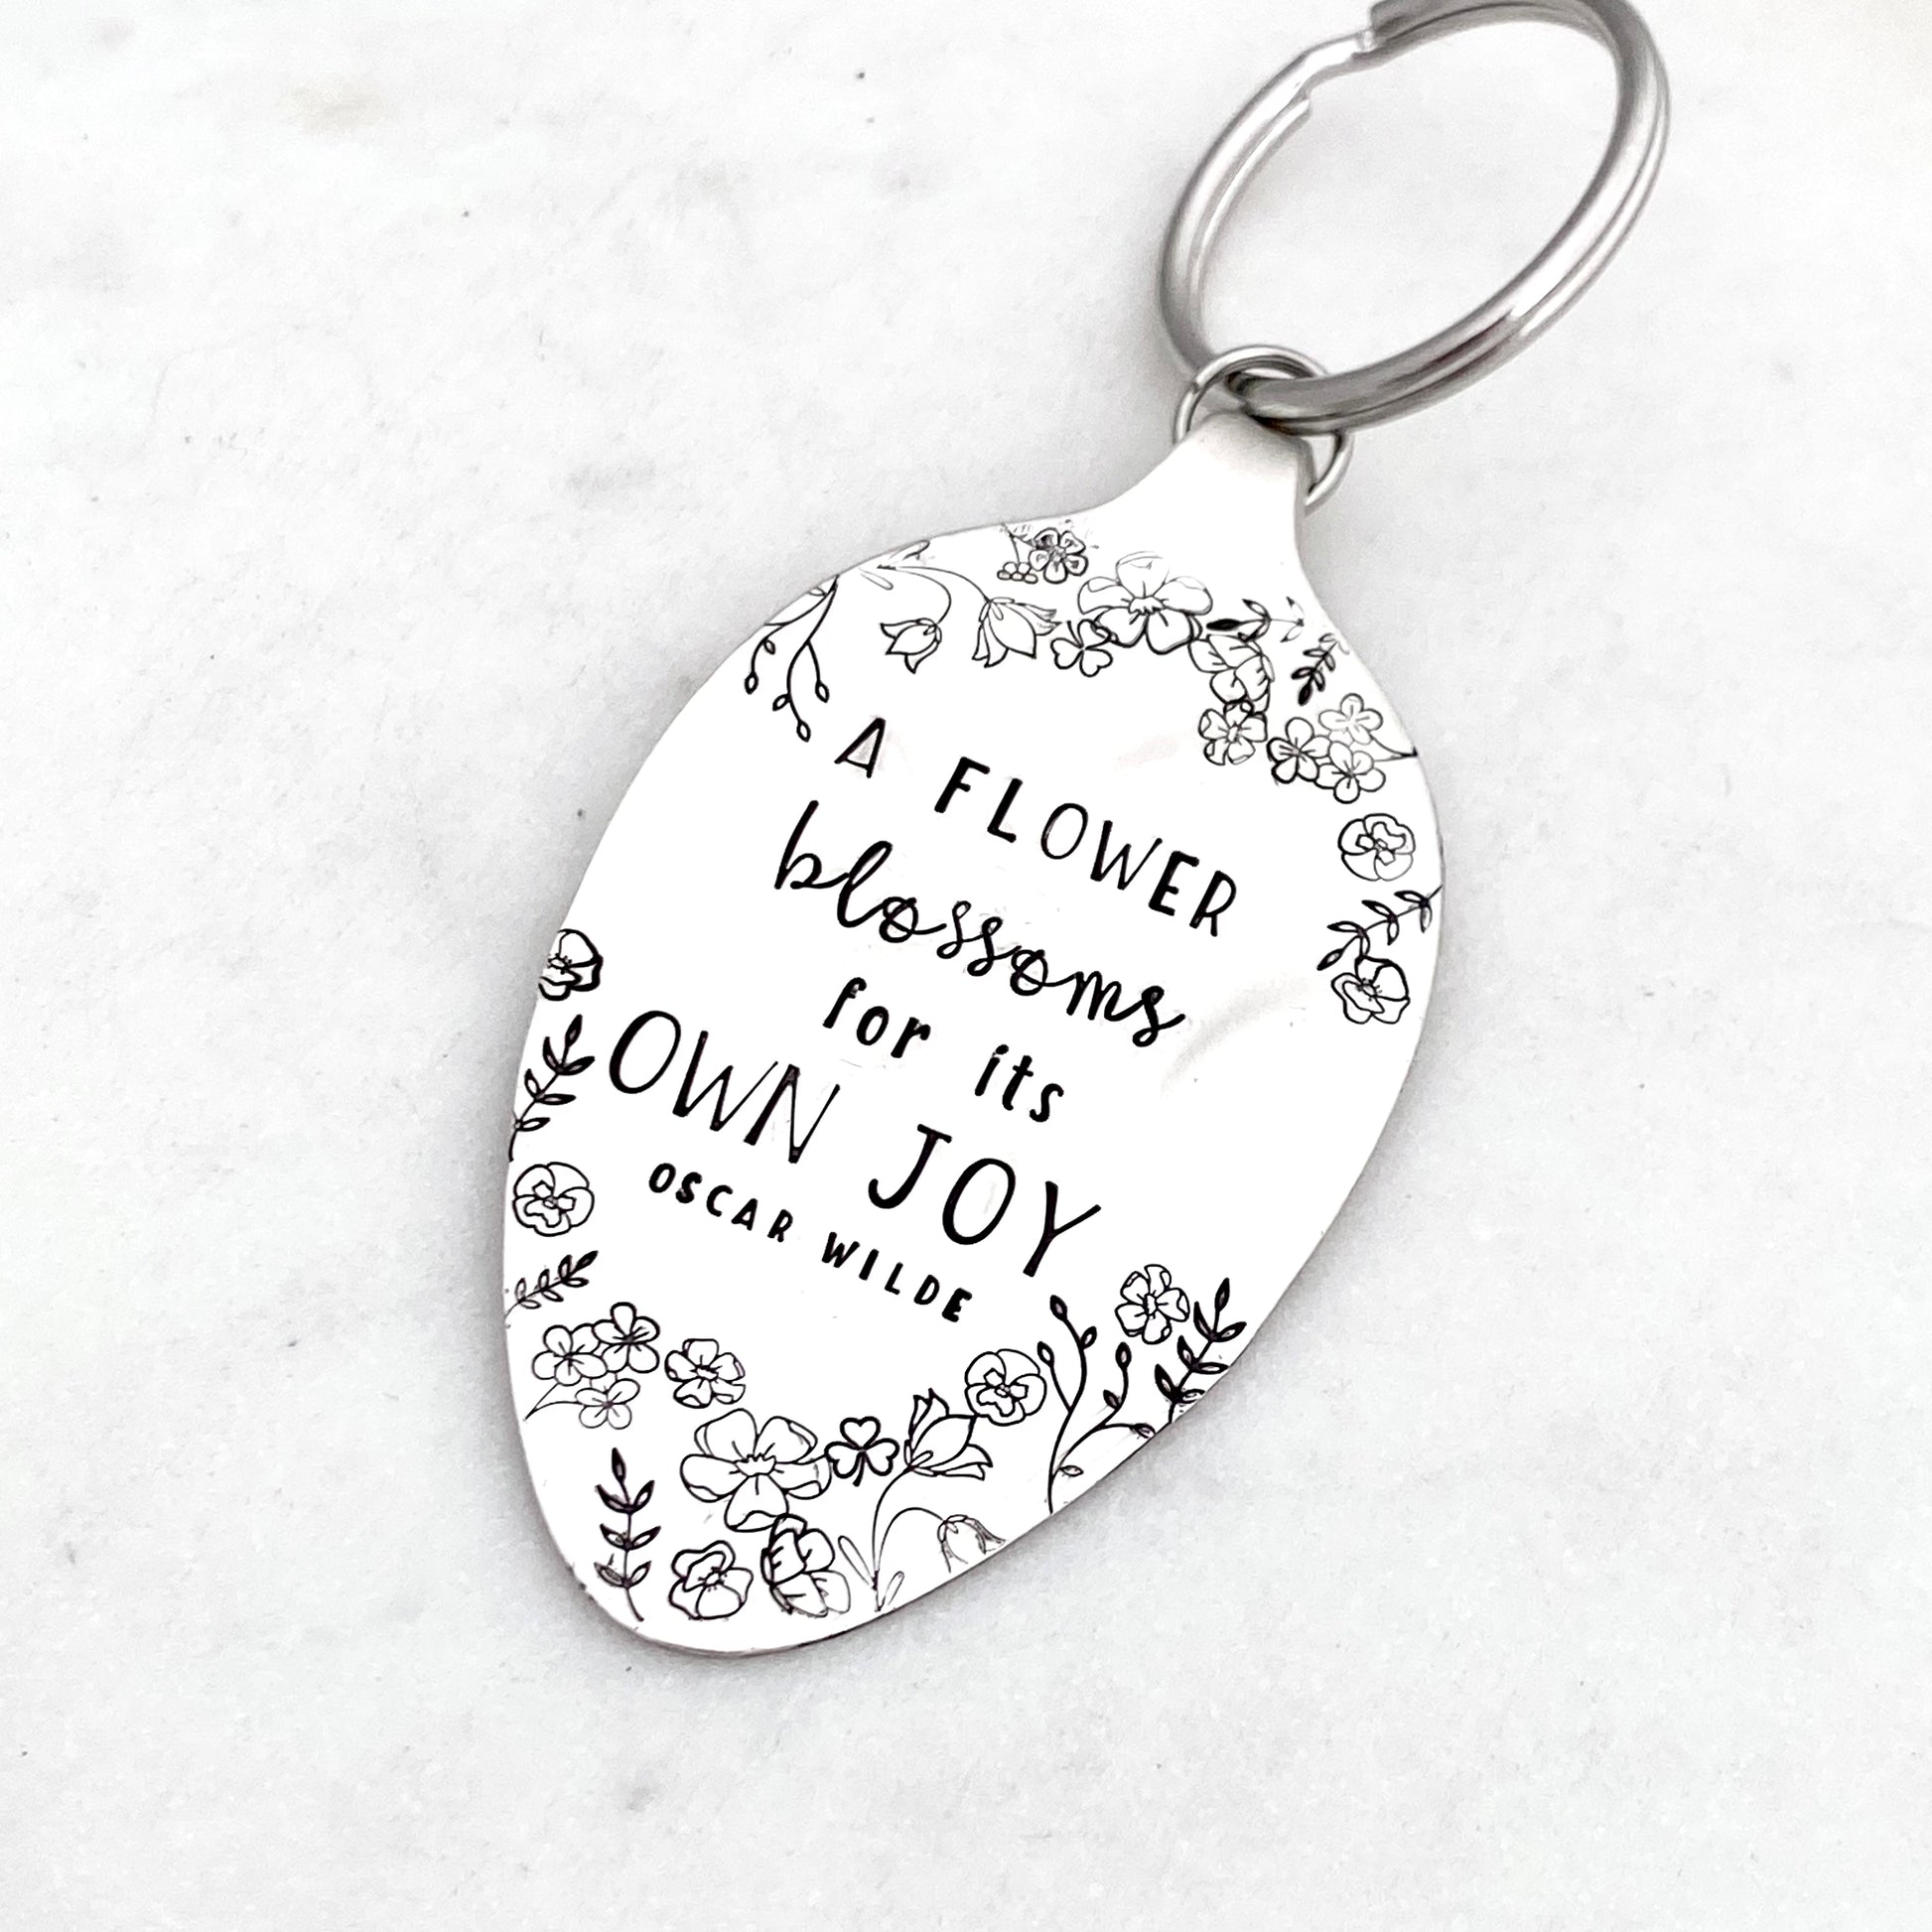 A Flower Blossoms for its Own Joy, Hand Stamped Vintage Spoon Keychain Keychains callistafaye   